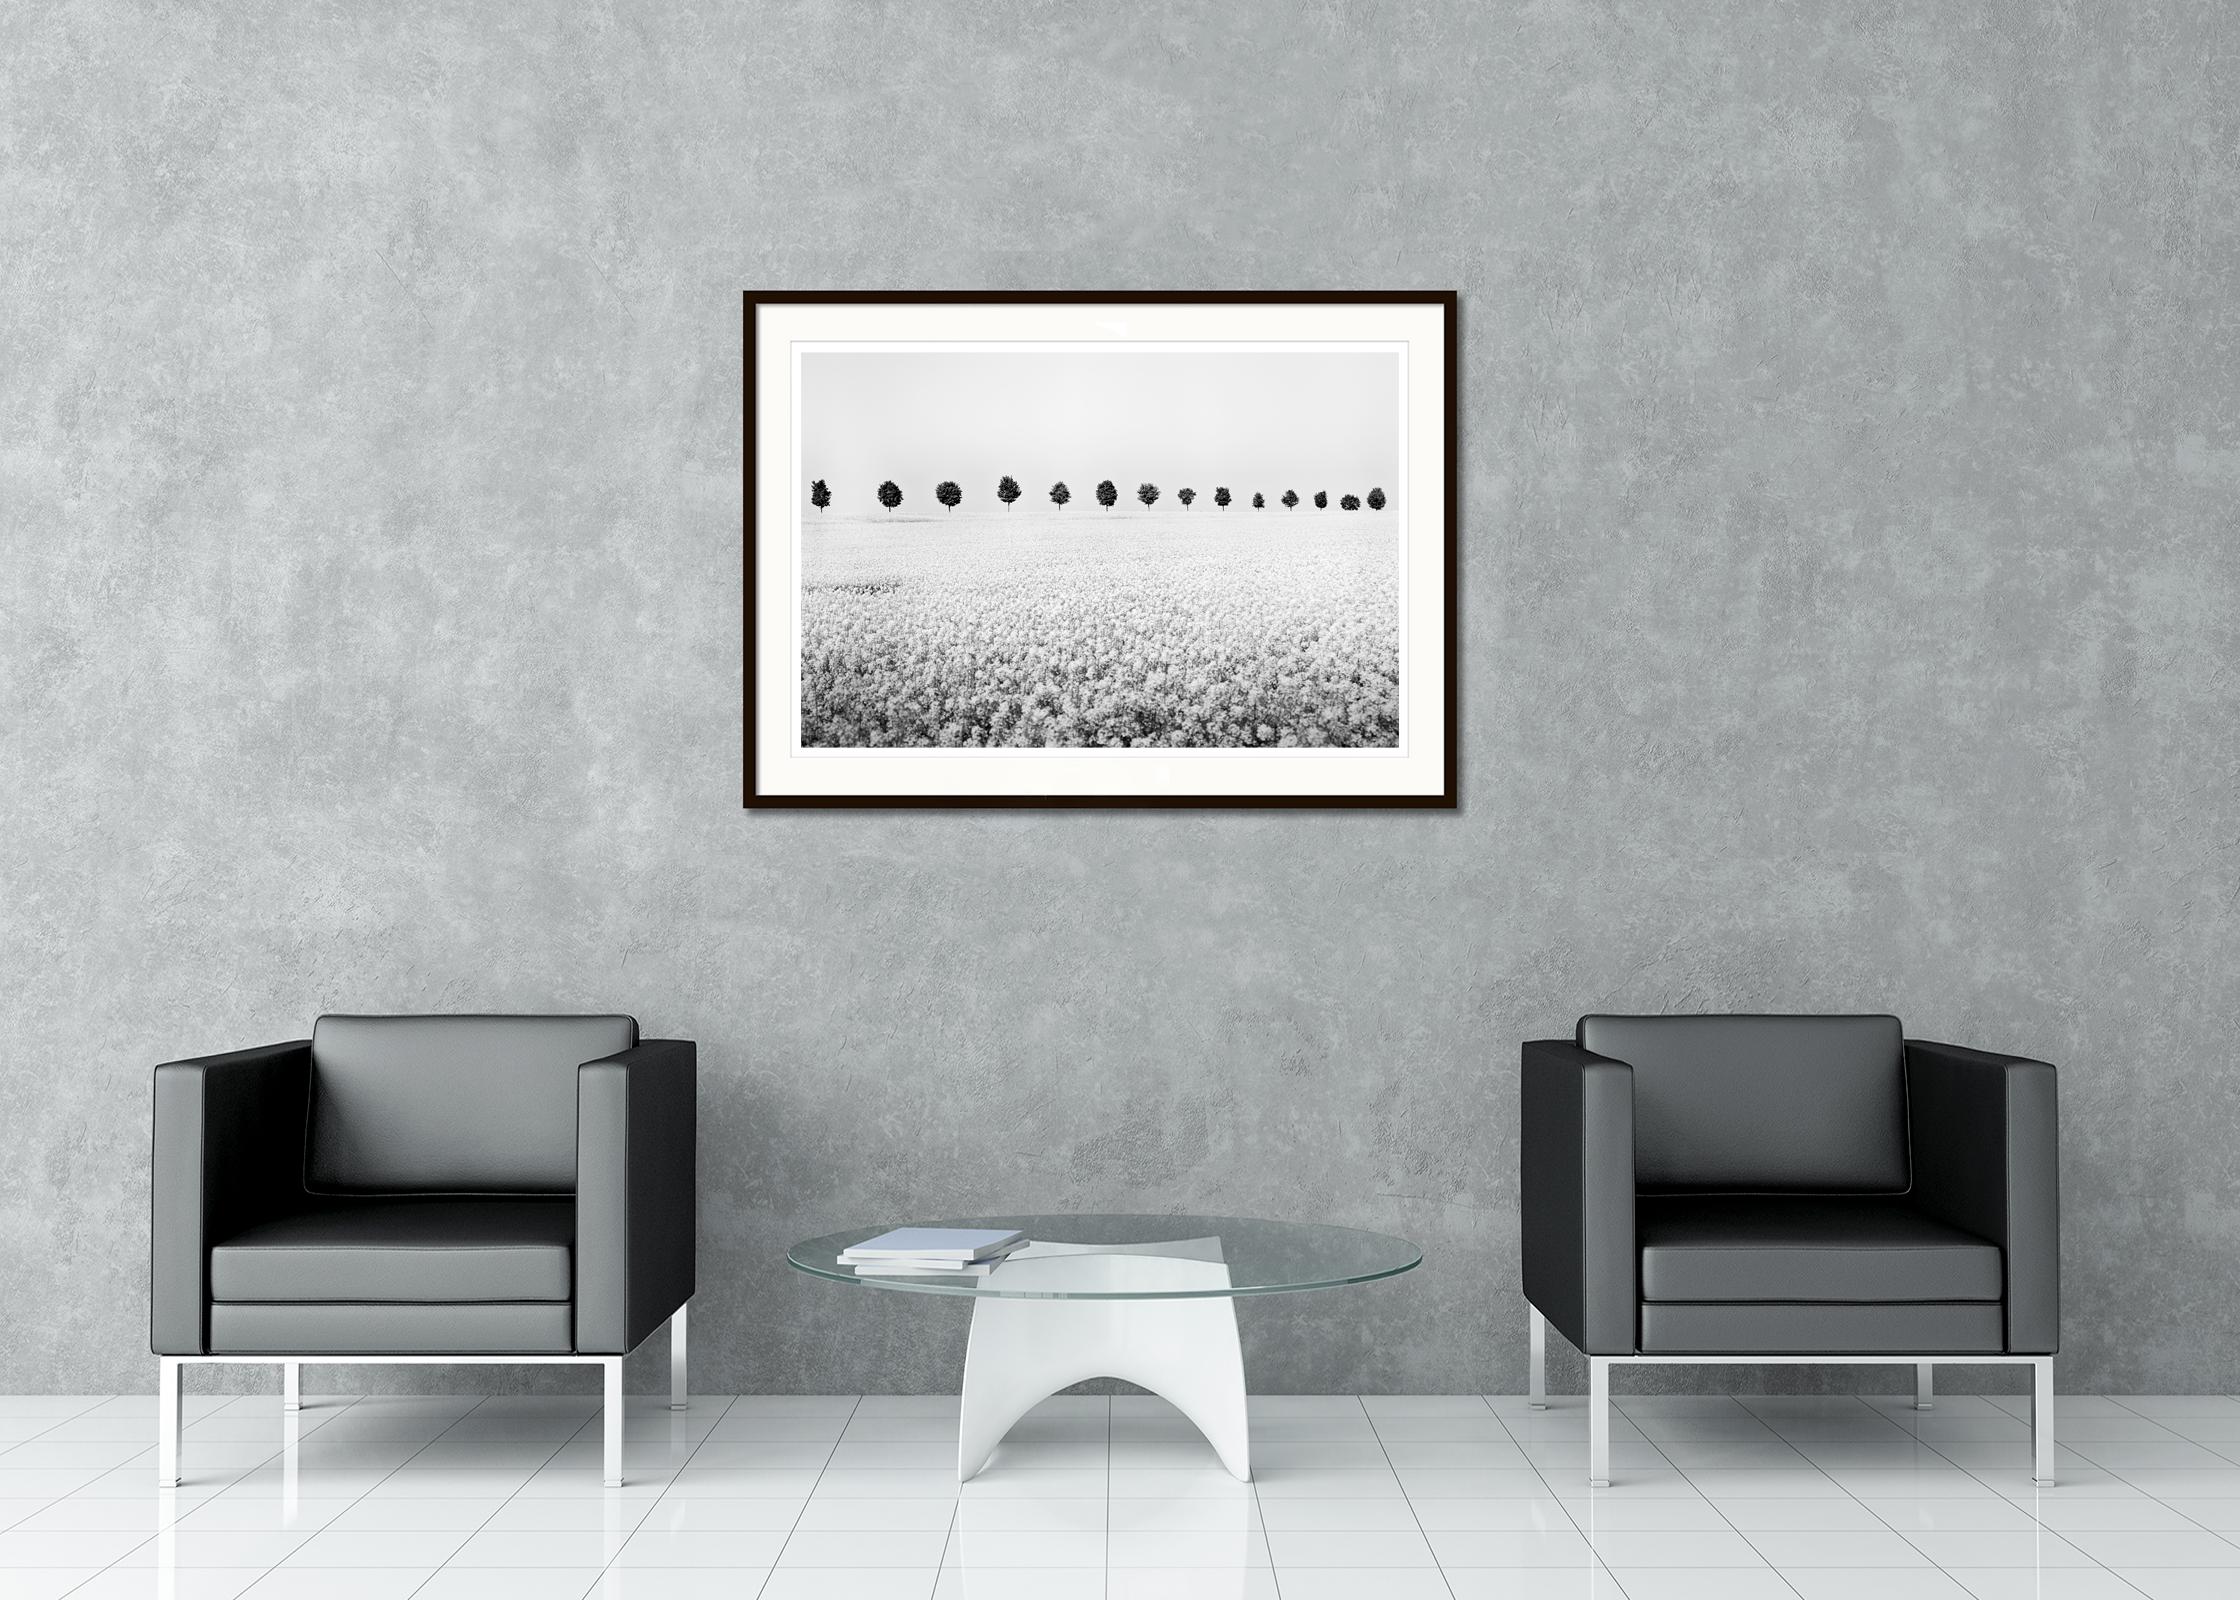 Black and white fine art minimalist landscape photography print. Rapsfeld field with a row of trees, France. Archival pigment ink print, edition of 7. Signed, titled, dated and numbered by artist. Certificate of authenticity included. Printed with